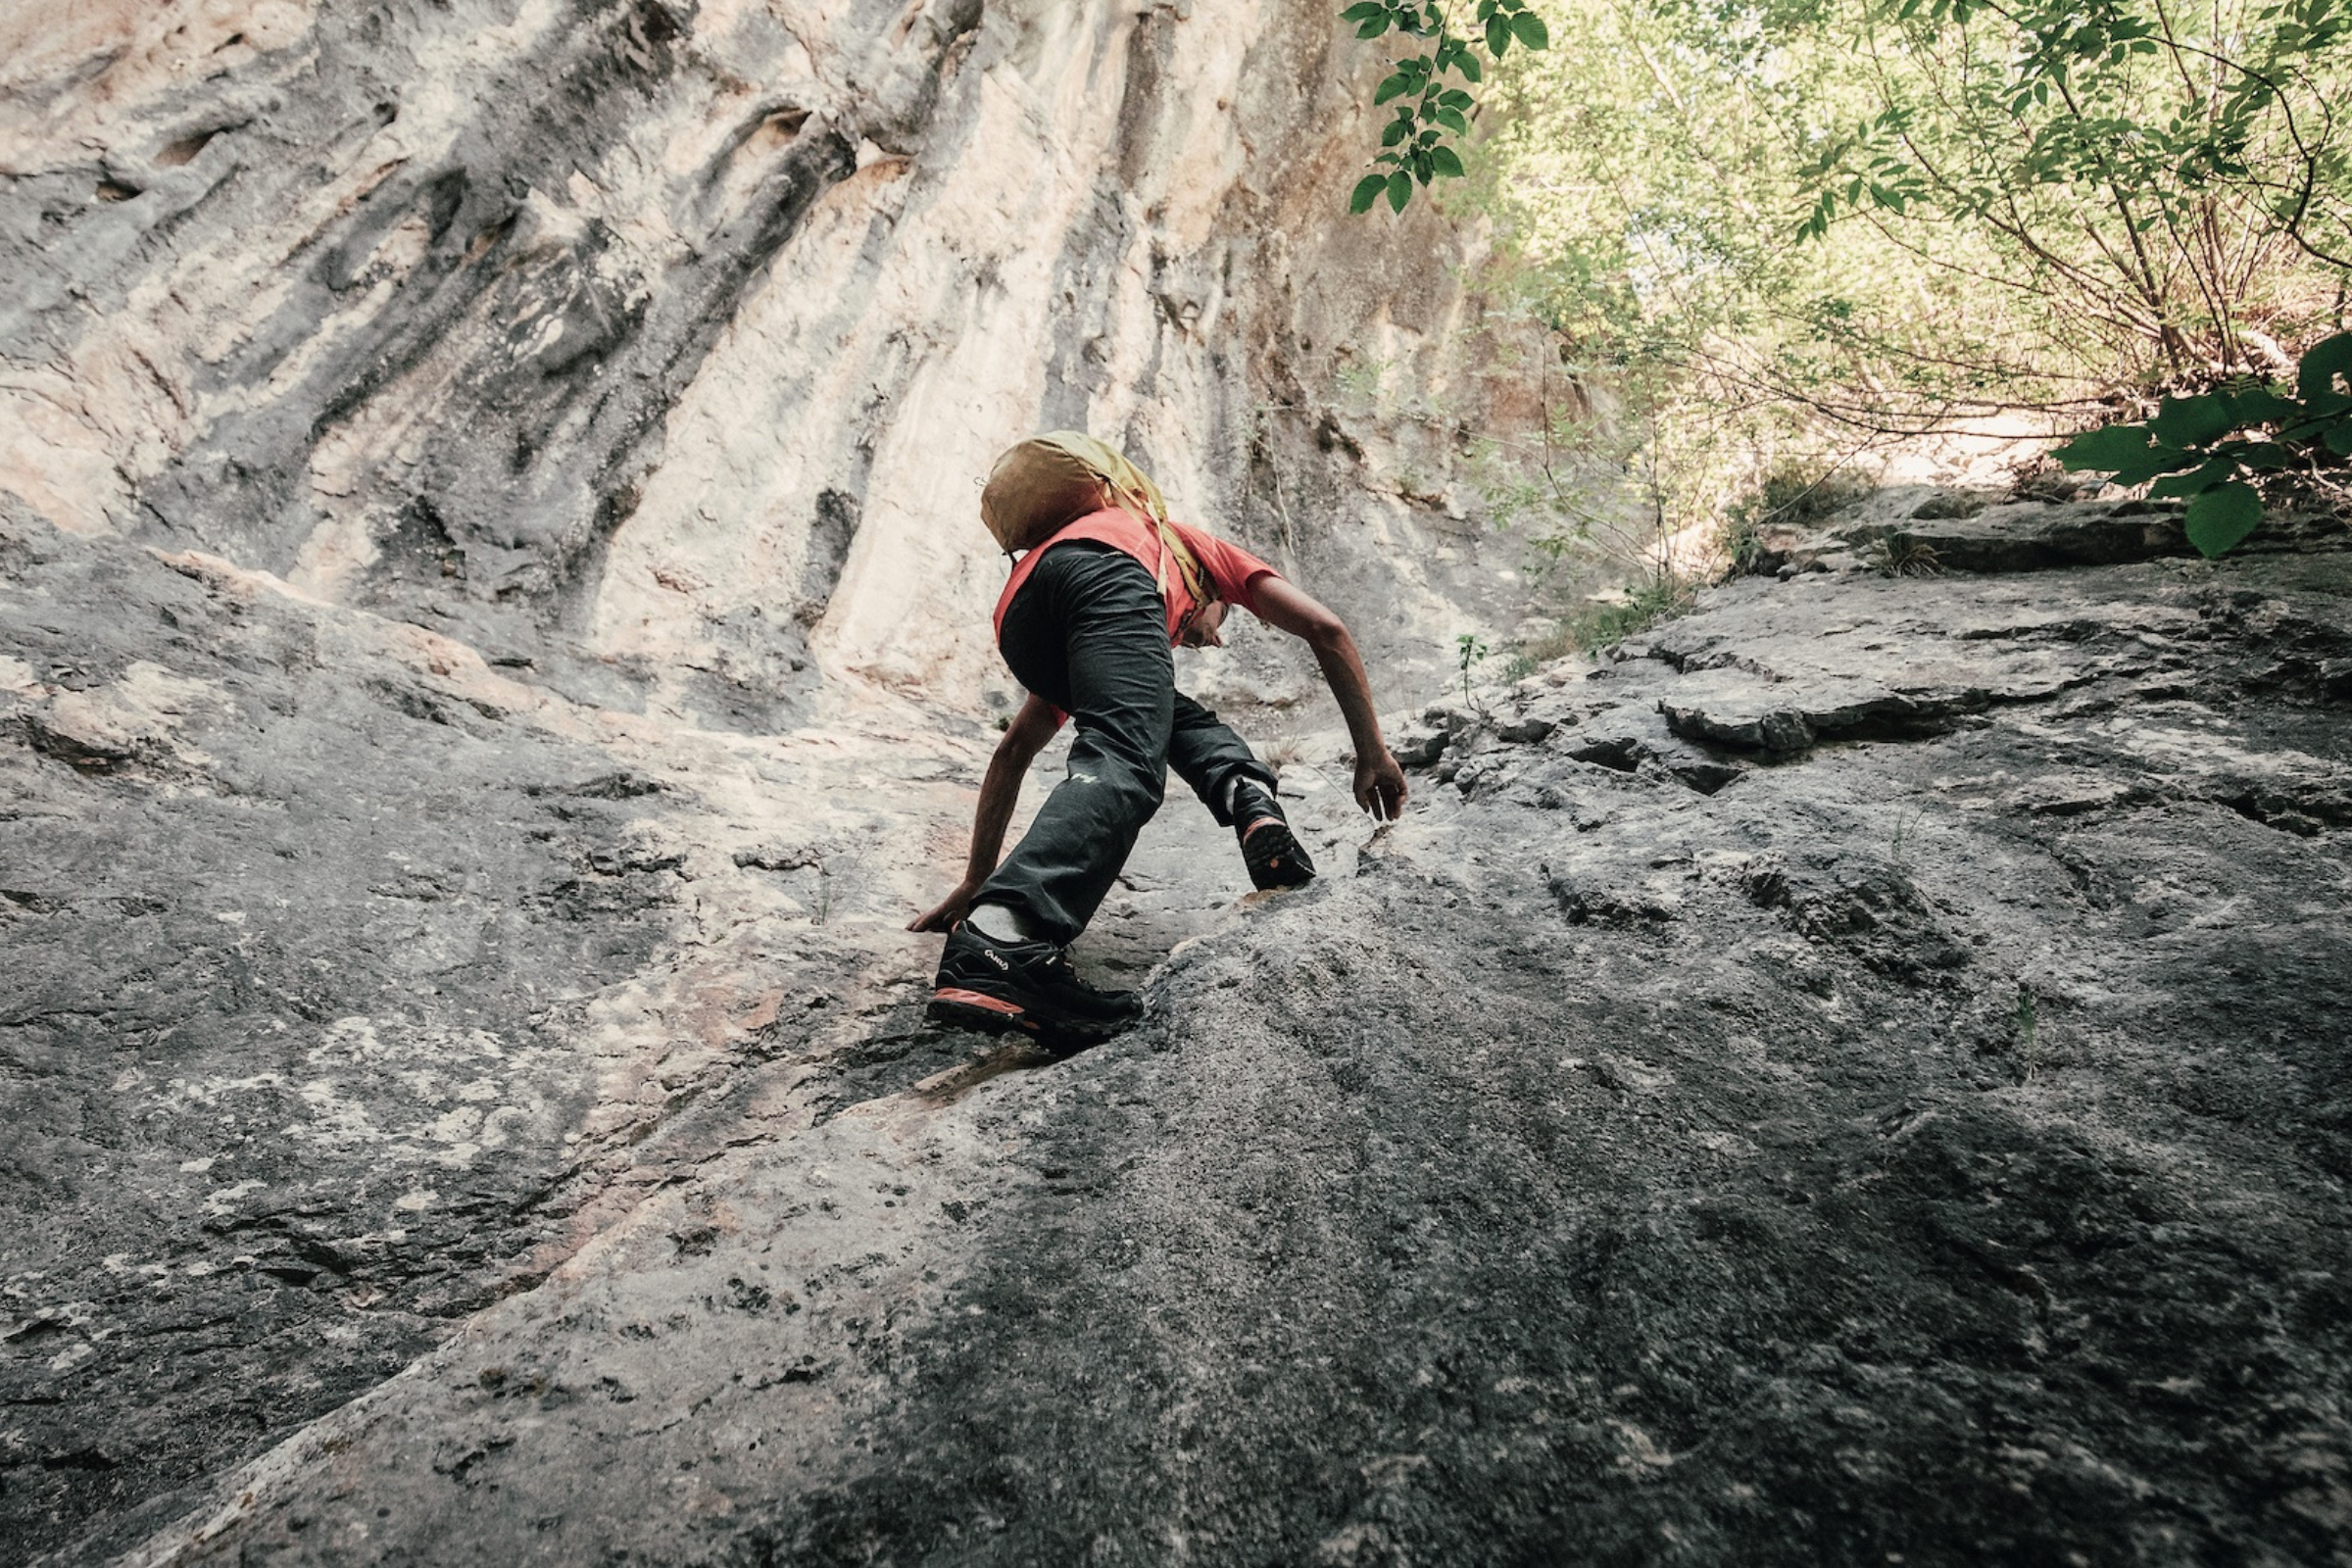 Need new approach shoes? Check out the Rock DFS from AKU